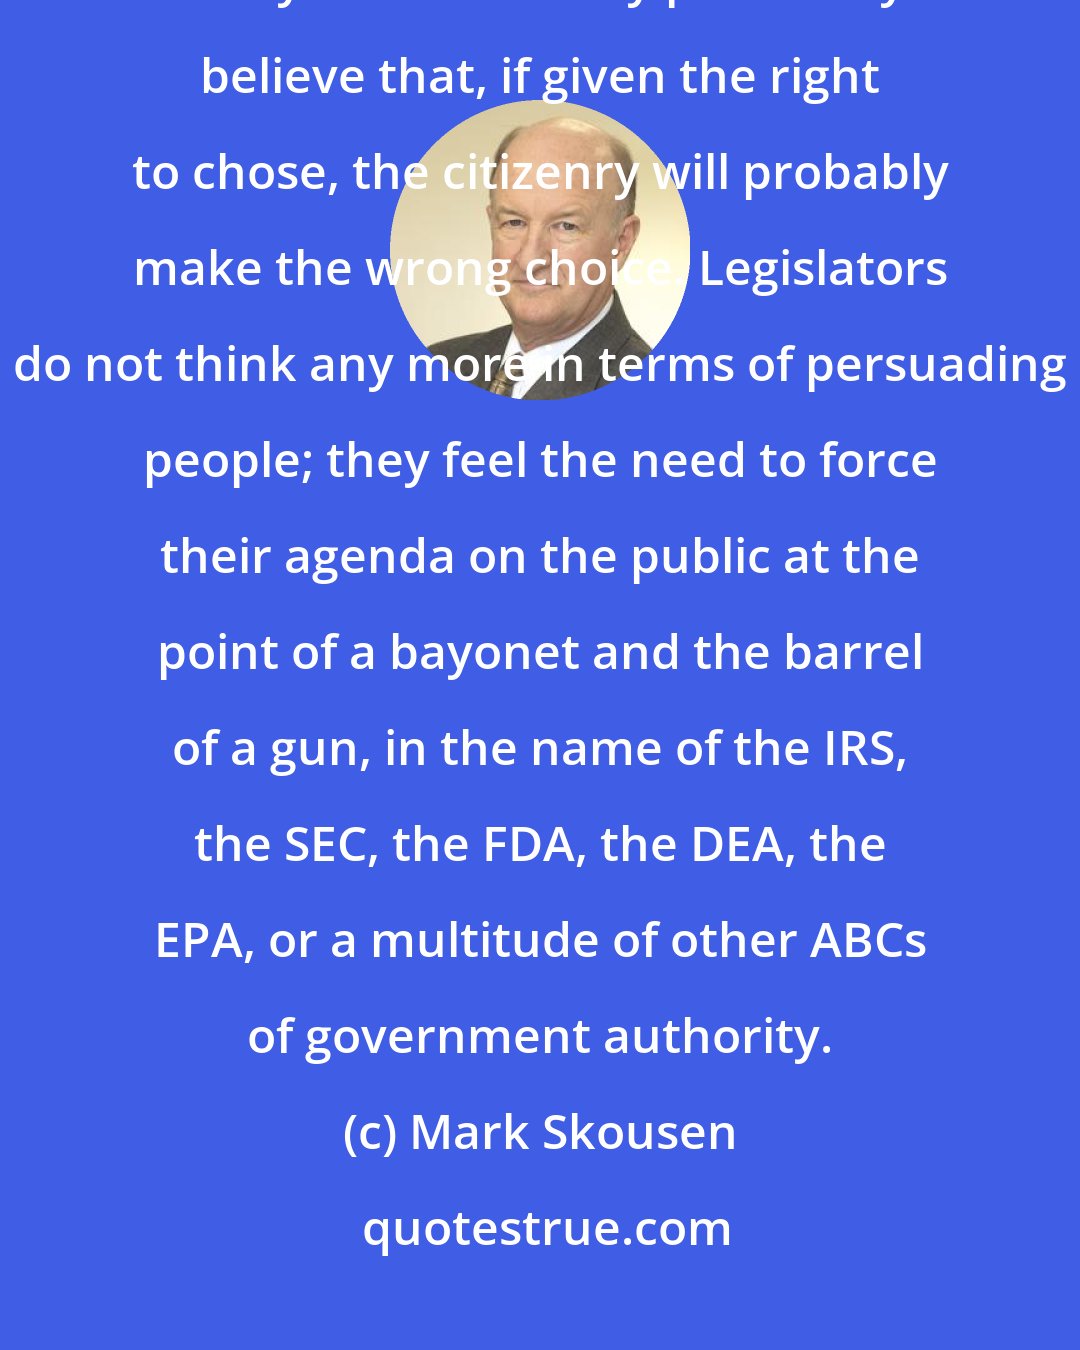 Mark Skousen: Today's political leaders demonstrate their low opinion of the public with every social law they pass. They believe that, if given the right to chose, the citizenry will probably make the wrong choice. Legislators do not think any more in terms of persuading people; they feel the need to force their agenda on the public at the point of a bayonet and the barrel of a gun, in the name of the IRS, the SEC, the FDA, the DEA, the EPA, or a multitude of other ABCs of government authority.